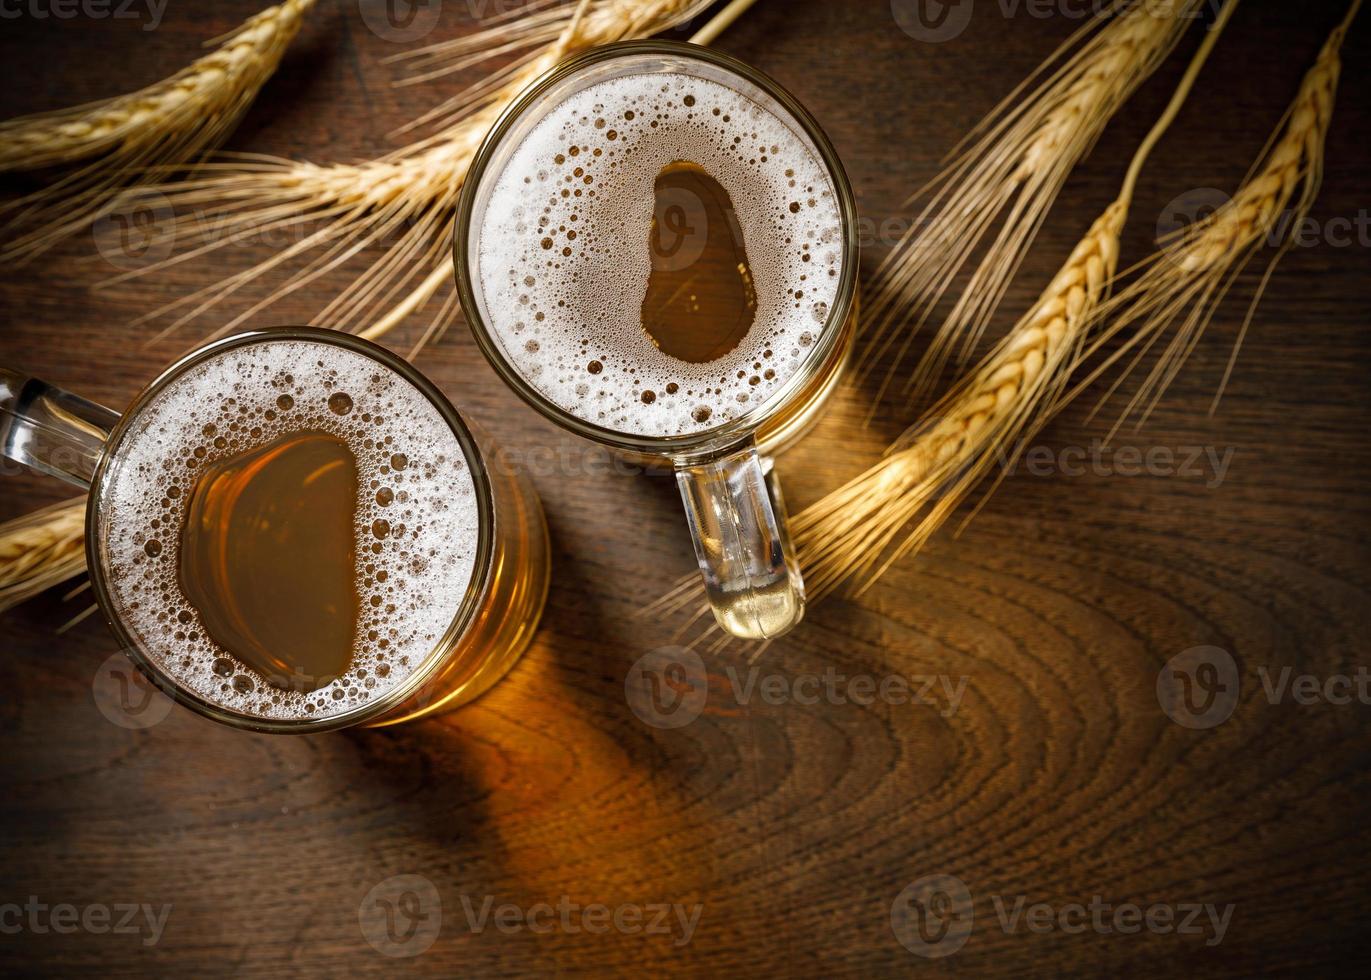 Glasses of Light Beer with wheat on the wooden table, copy space for your text photo